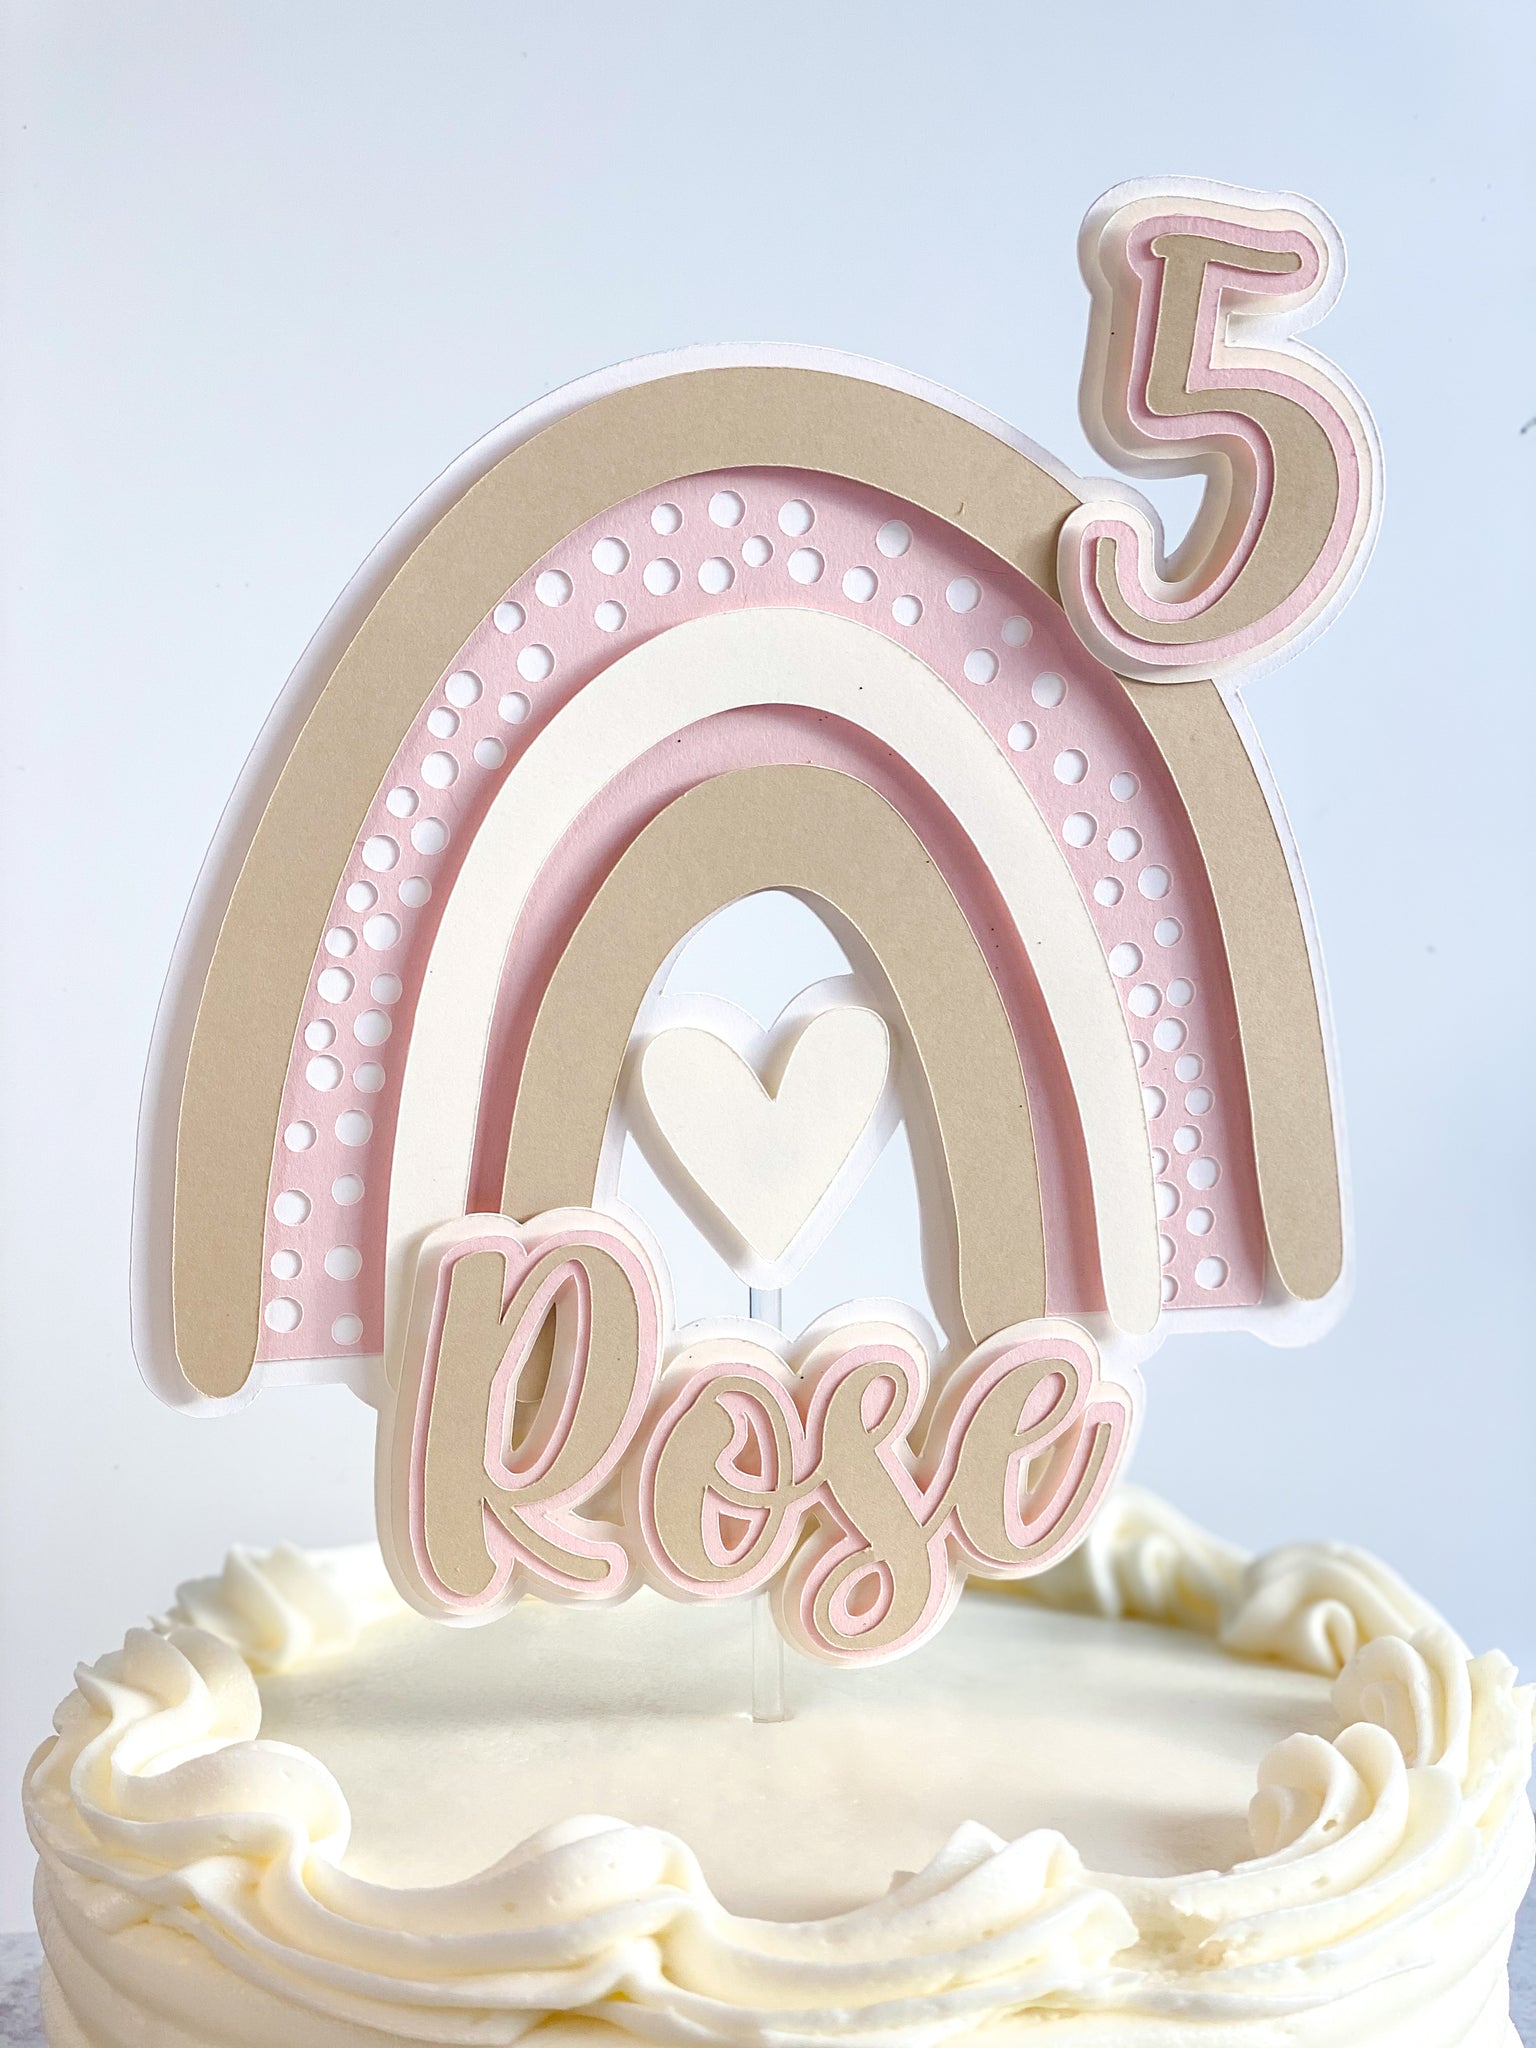 1pc Number 5 Shaped Cake Topper | SHEIN